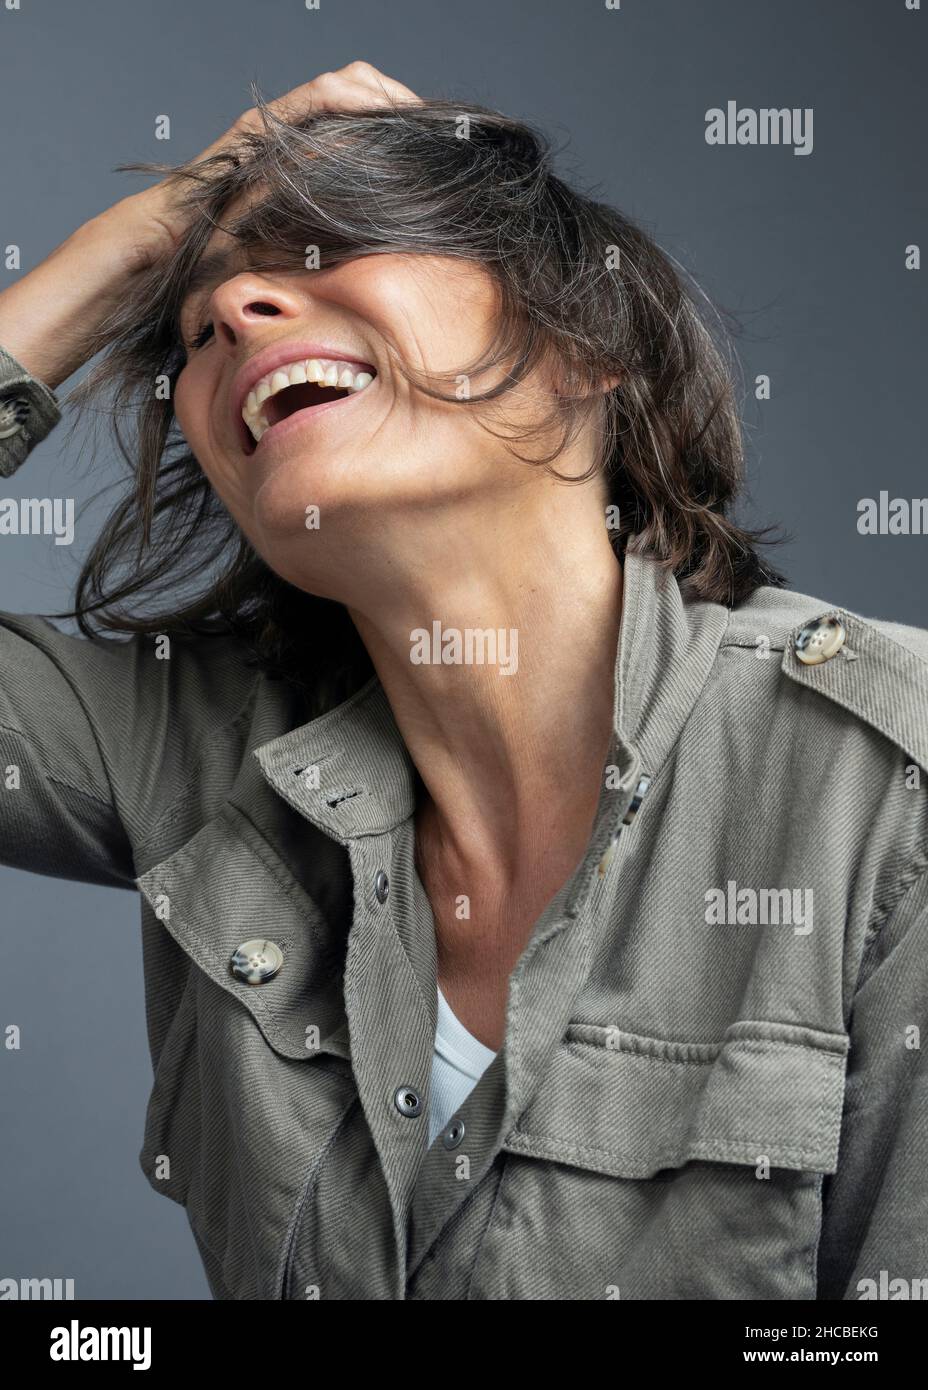 Smiling woman with hand in hair against gray background Stock Photo